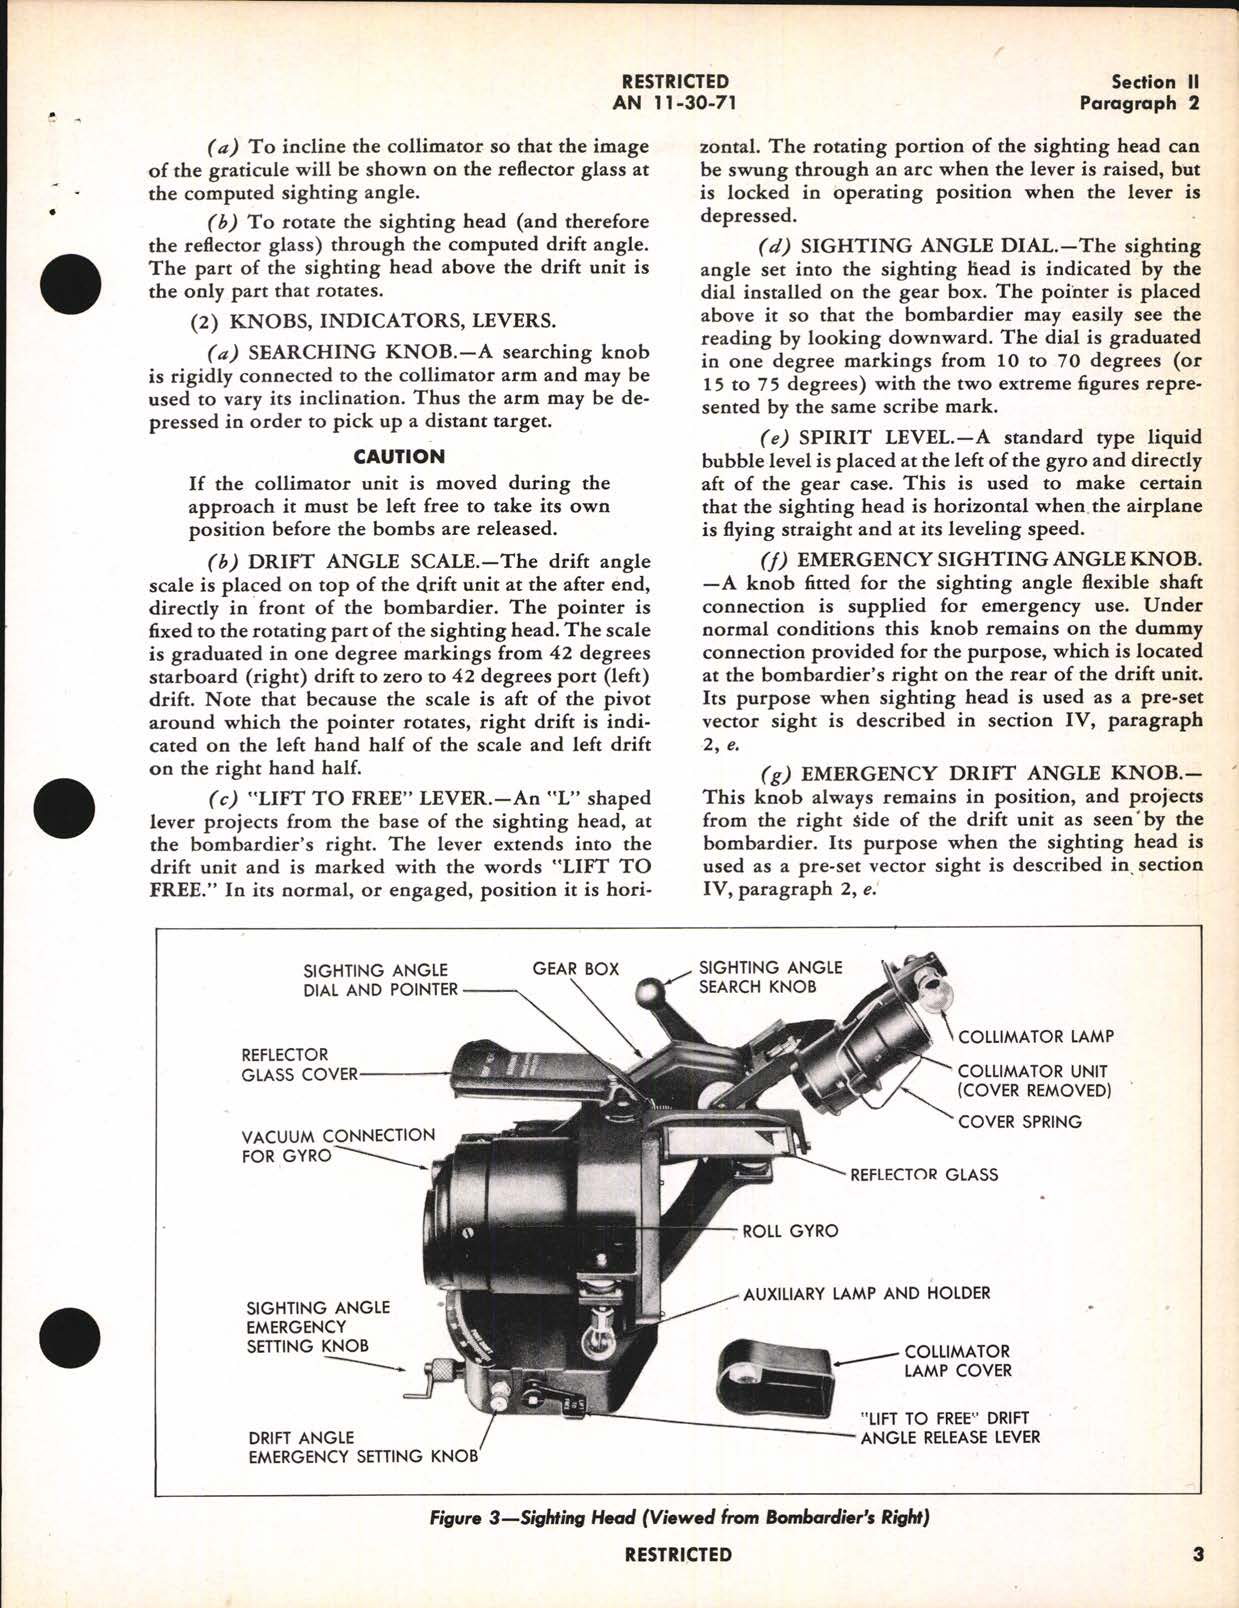 Sample page 7 from AirCorps Library document: Handbook of Instructions with Parts Catalog for Bombsights Types T-1A and T-1B